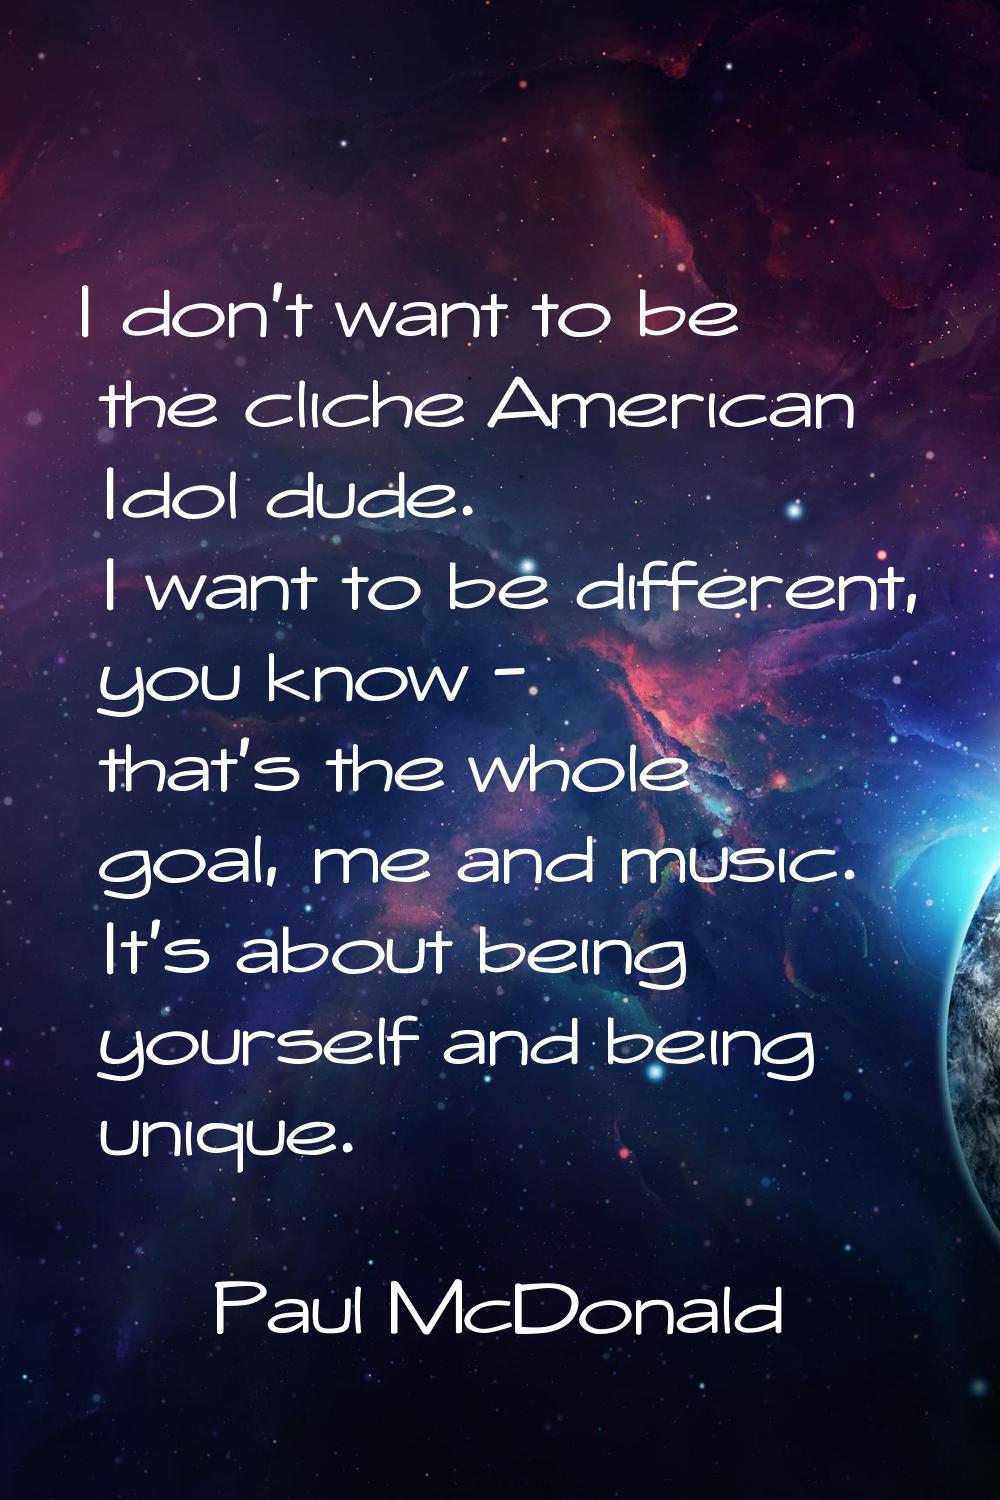 I don't want to be the cliche American Idol dude. I want to be different, you know - that's the who